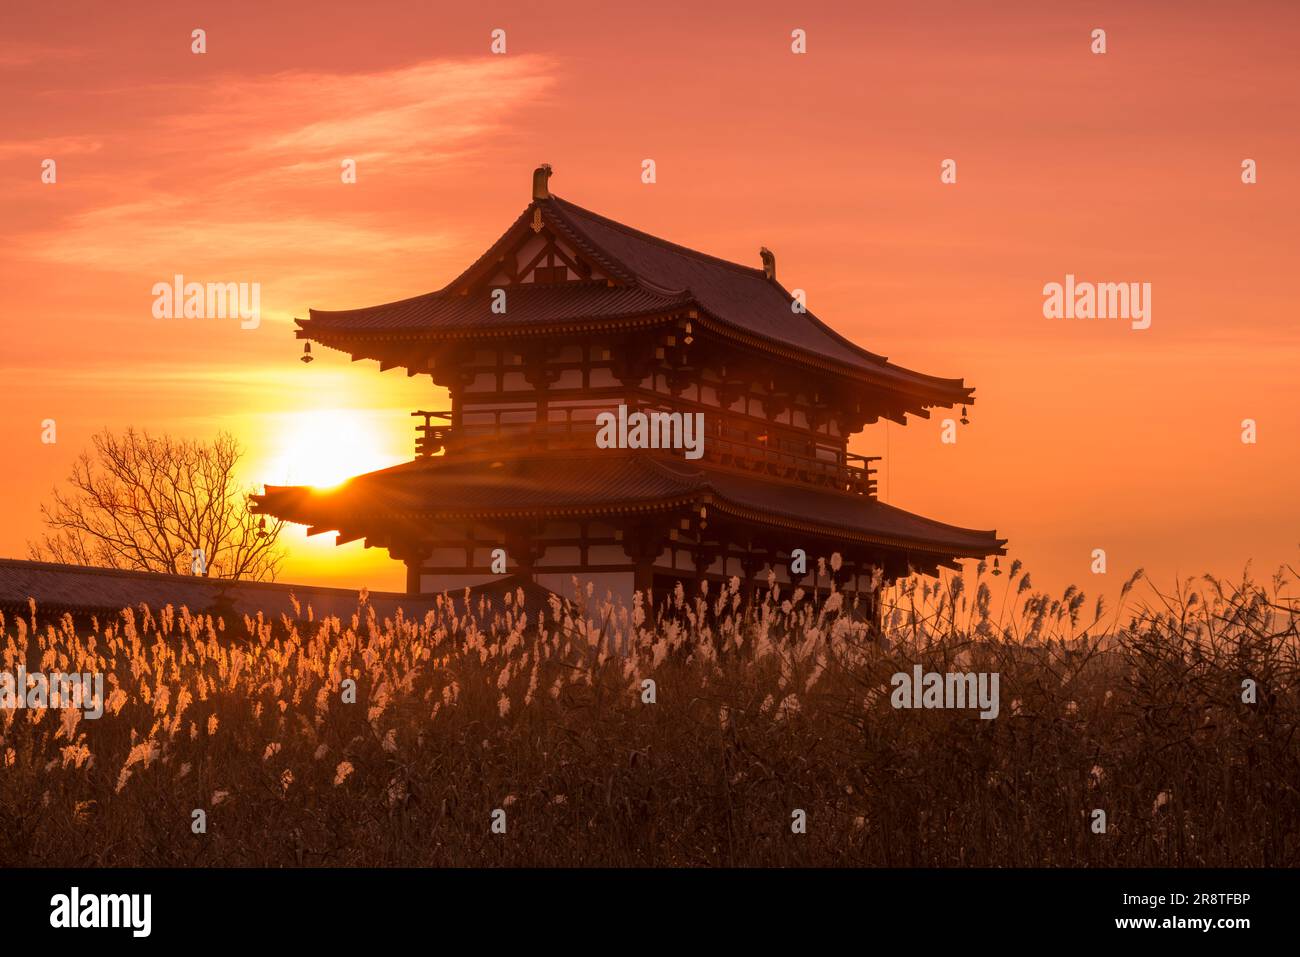 The Suzaku Gate of the Heijo Palace remains stained by the setting sun Stock Photo